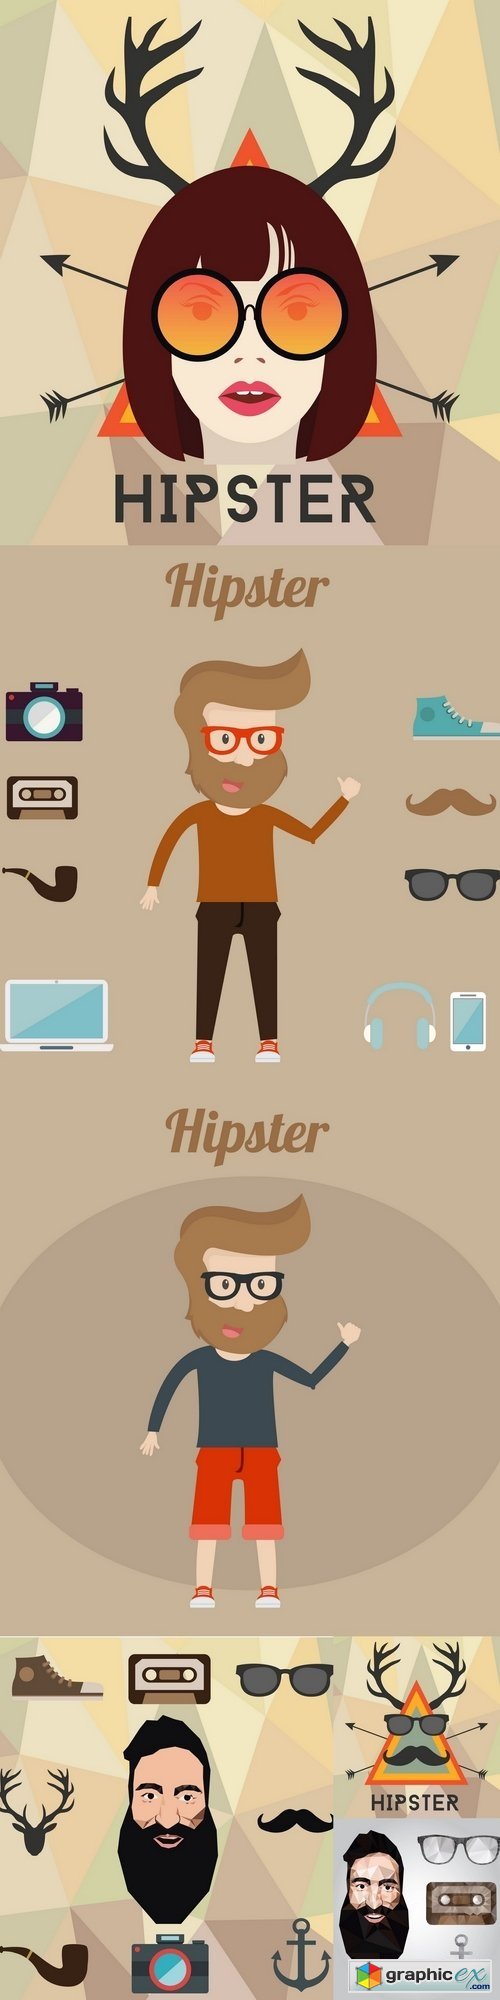 Cool hipster